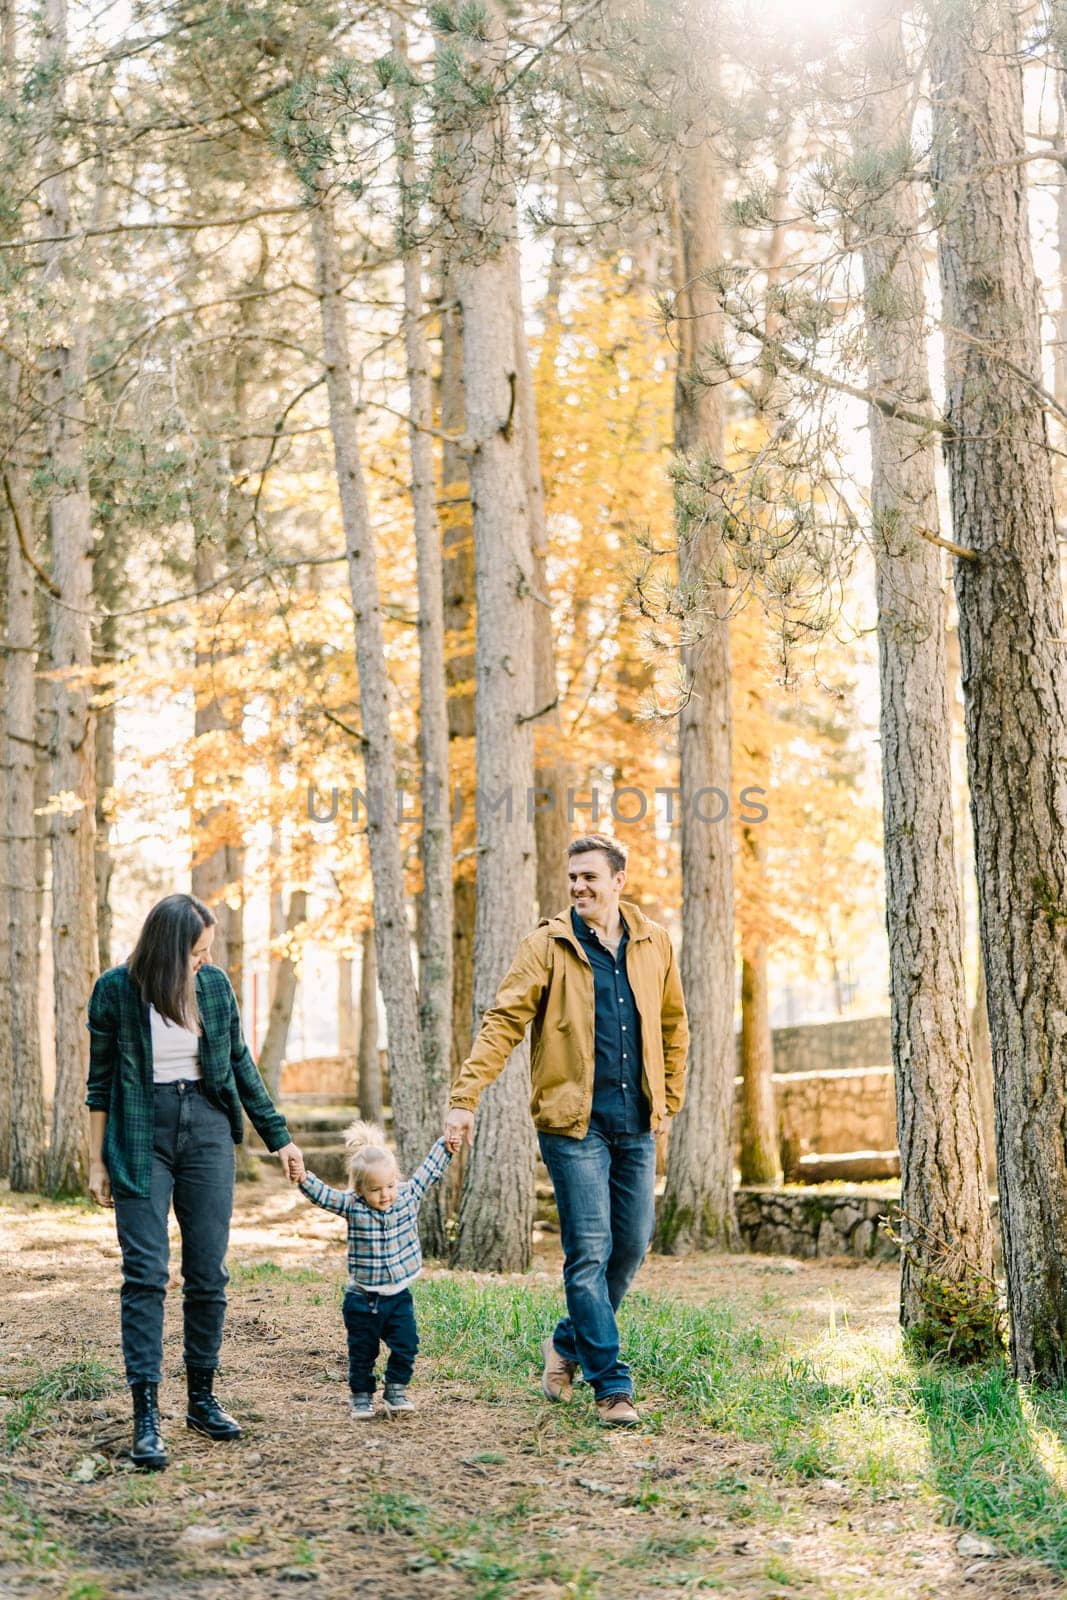 Mom and dad are holding the hands of a little girl walking in the park. High quality photo